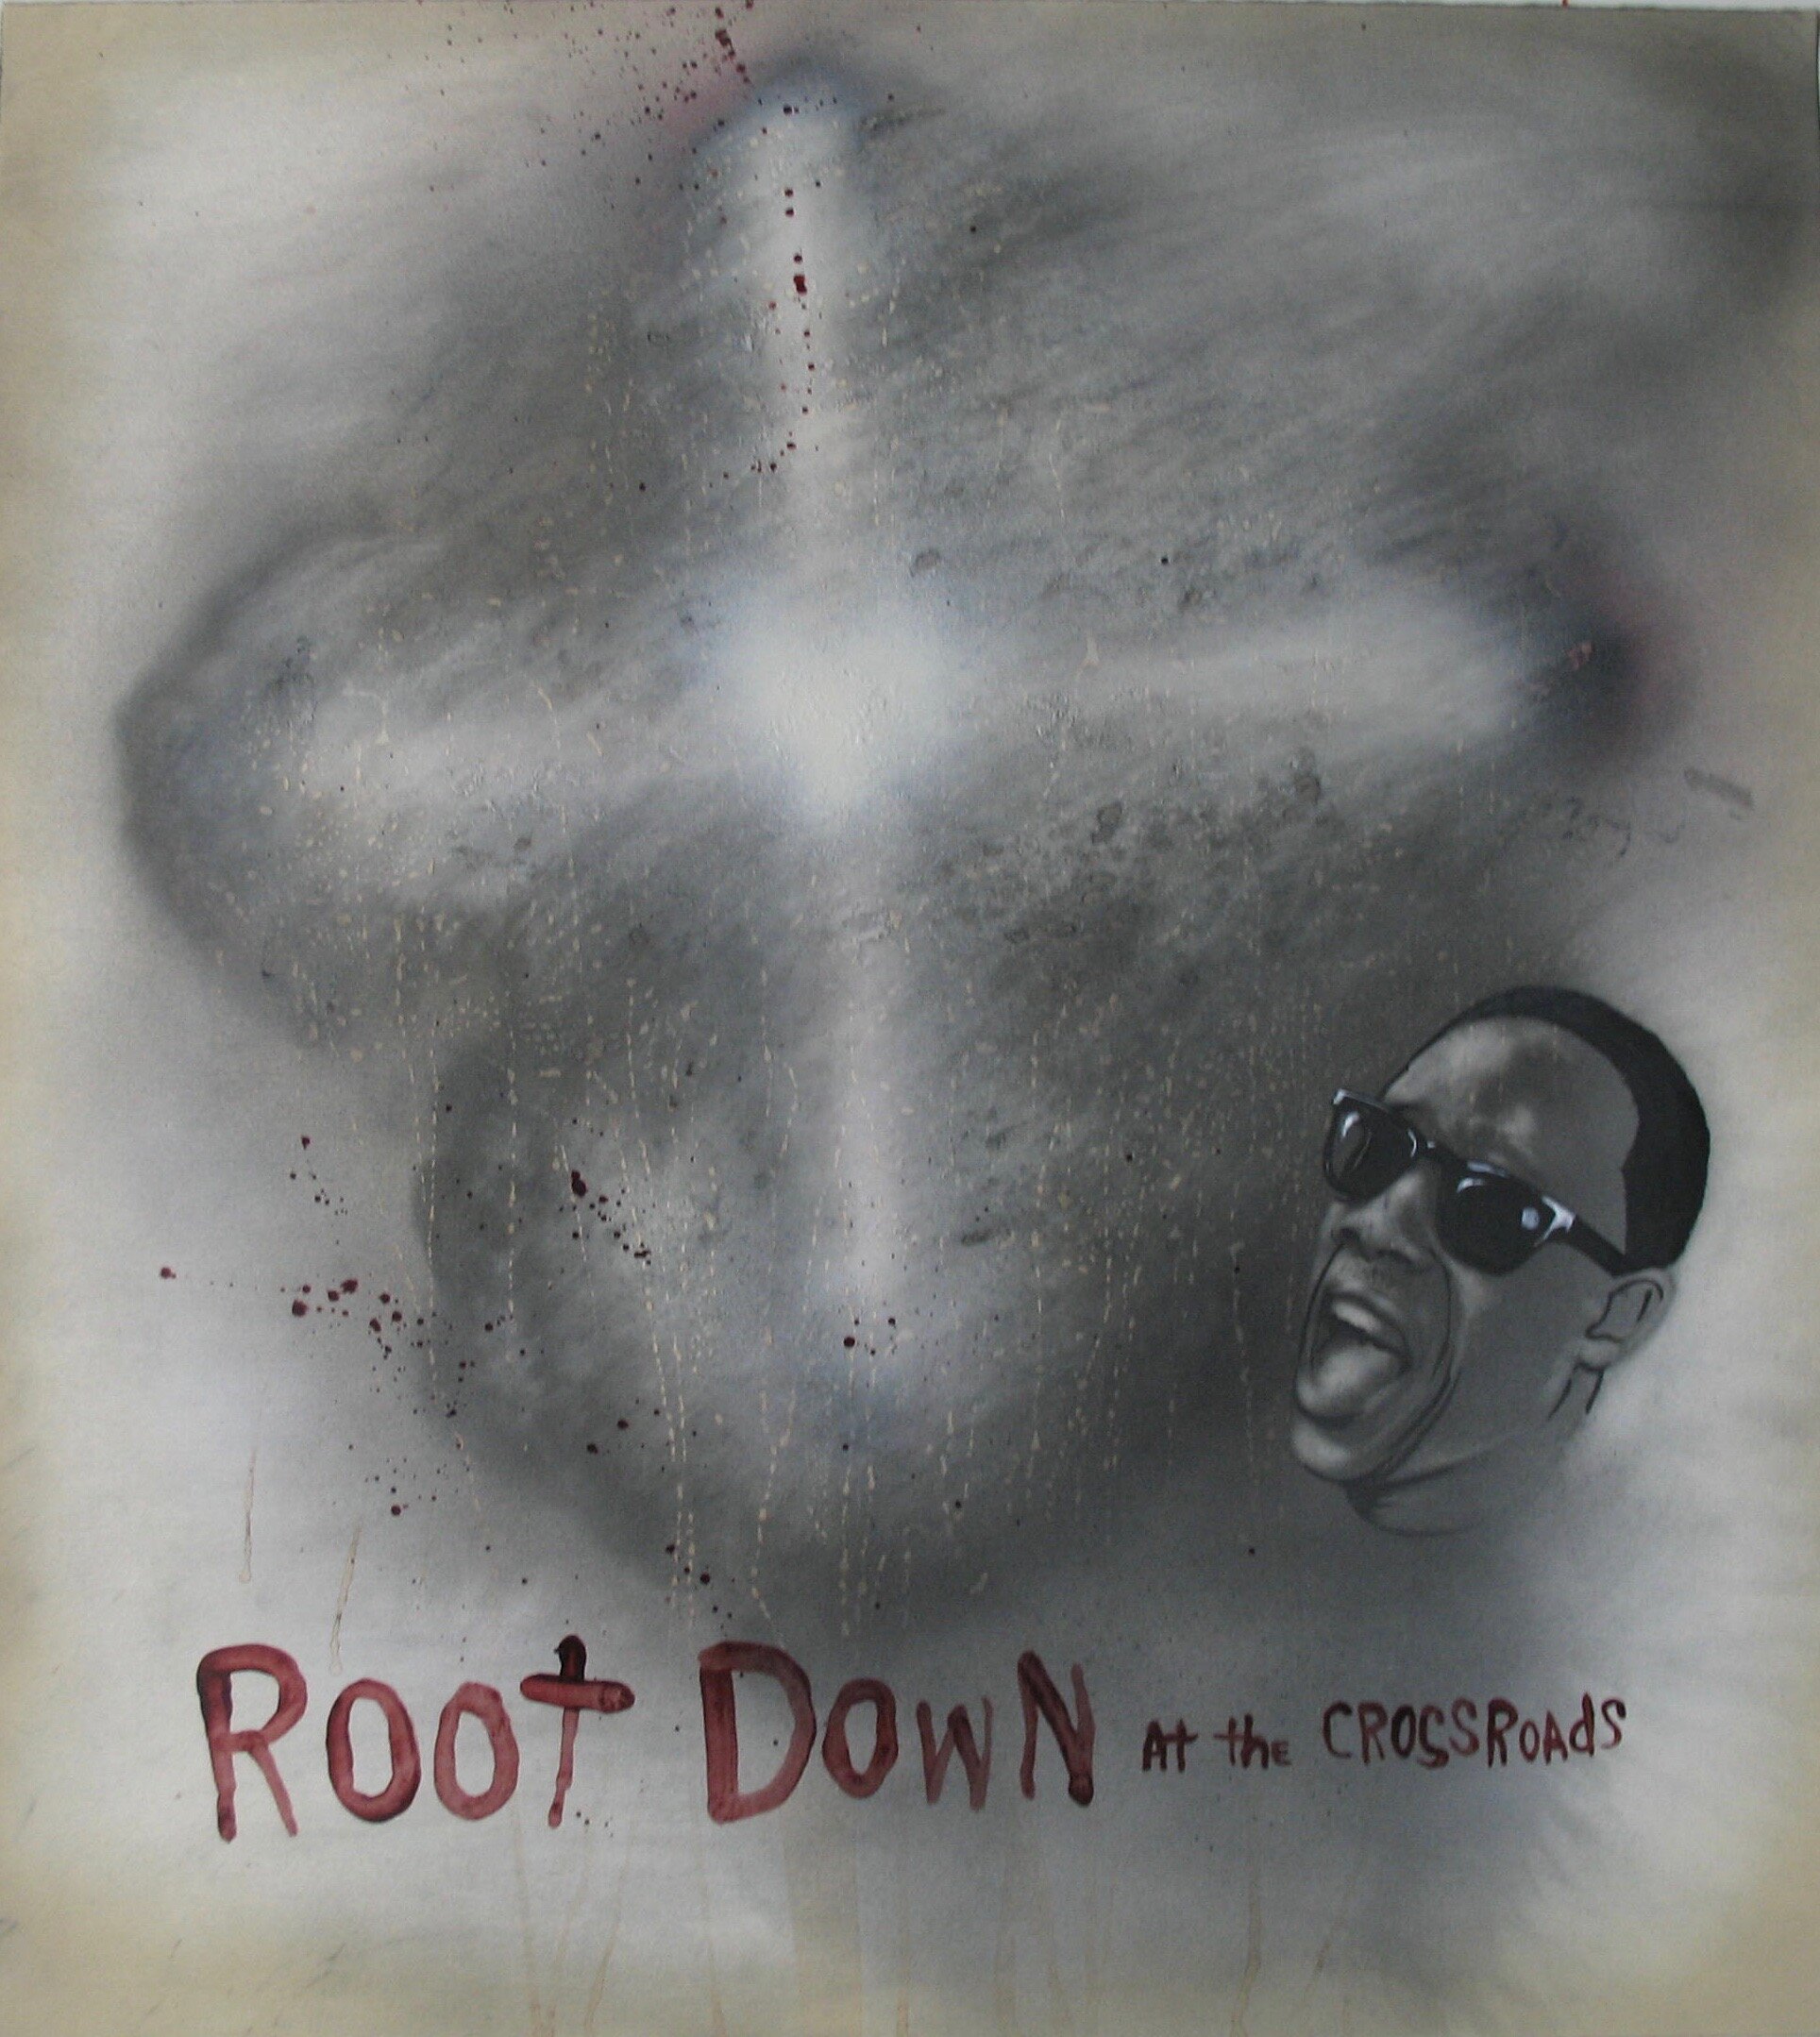   Root Down at the Crossroads , 2015  Graphite and mixed media on paper  22 x 20 in. (unframed) 